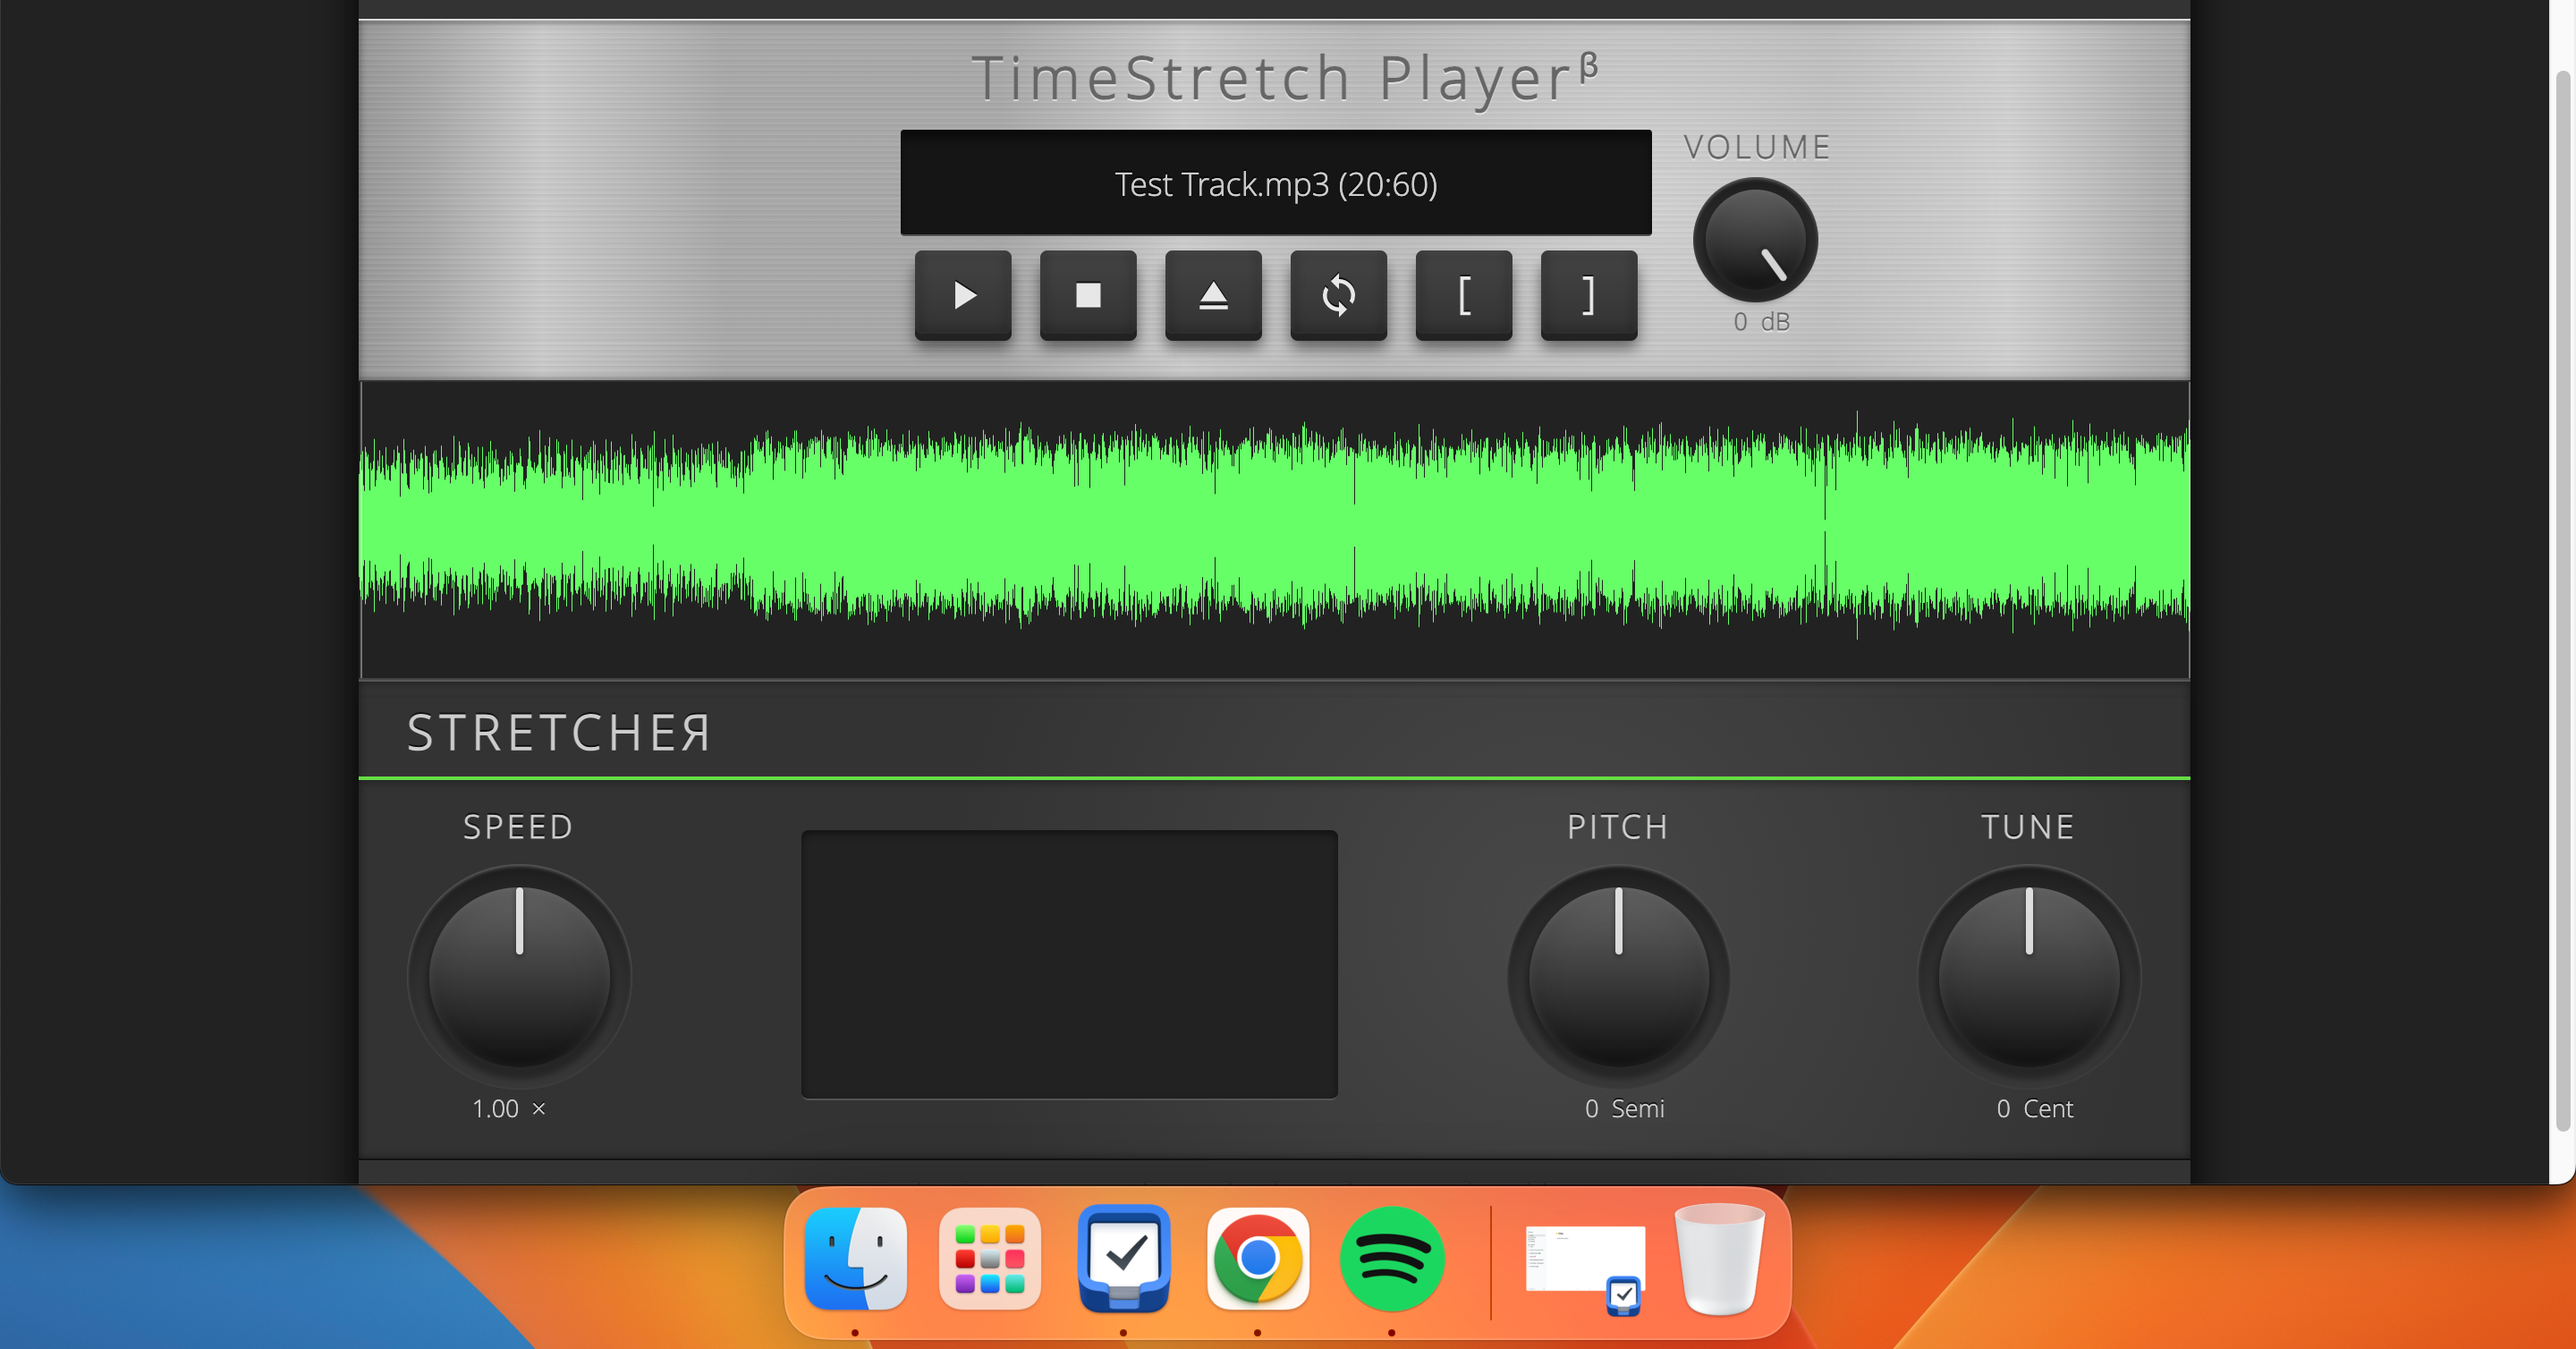 Search for inconsistencies in your music with the TimeStretch app